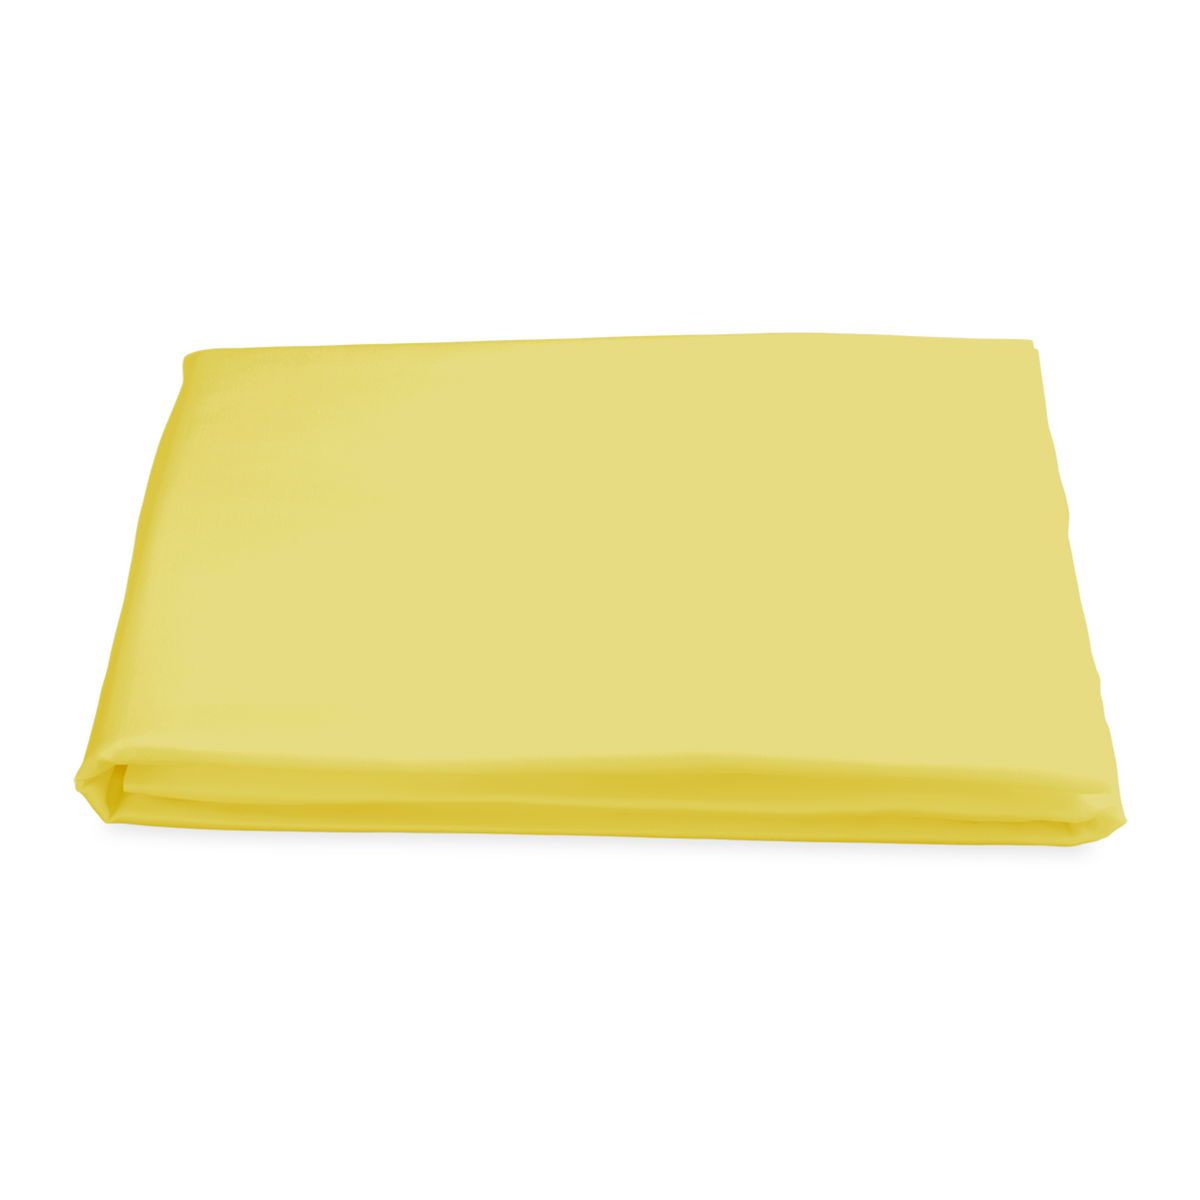 Fitted Sheet of Matouk Nocturne Bedding in Lemon Color